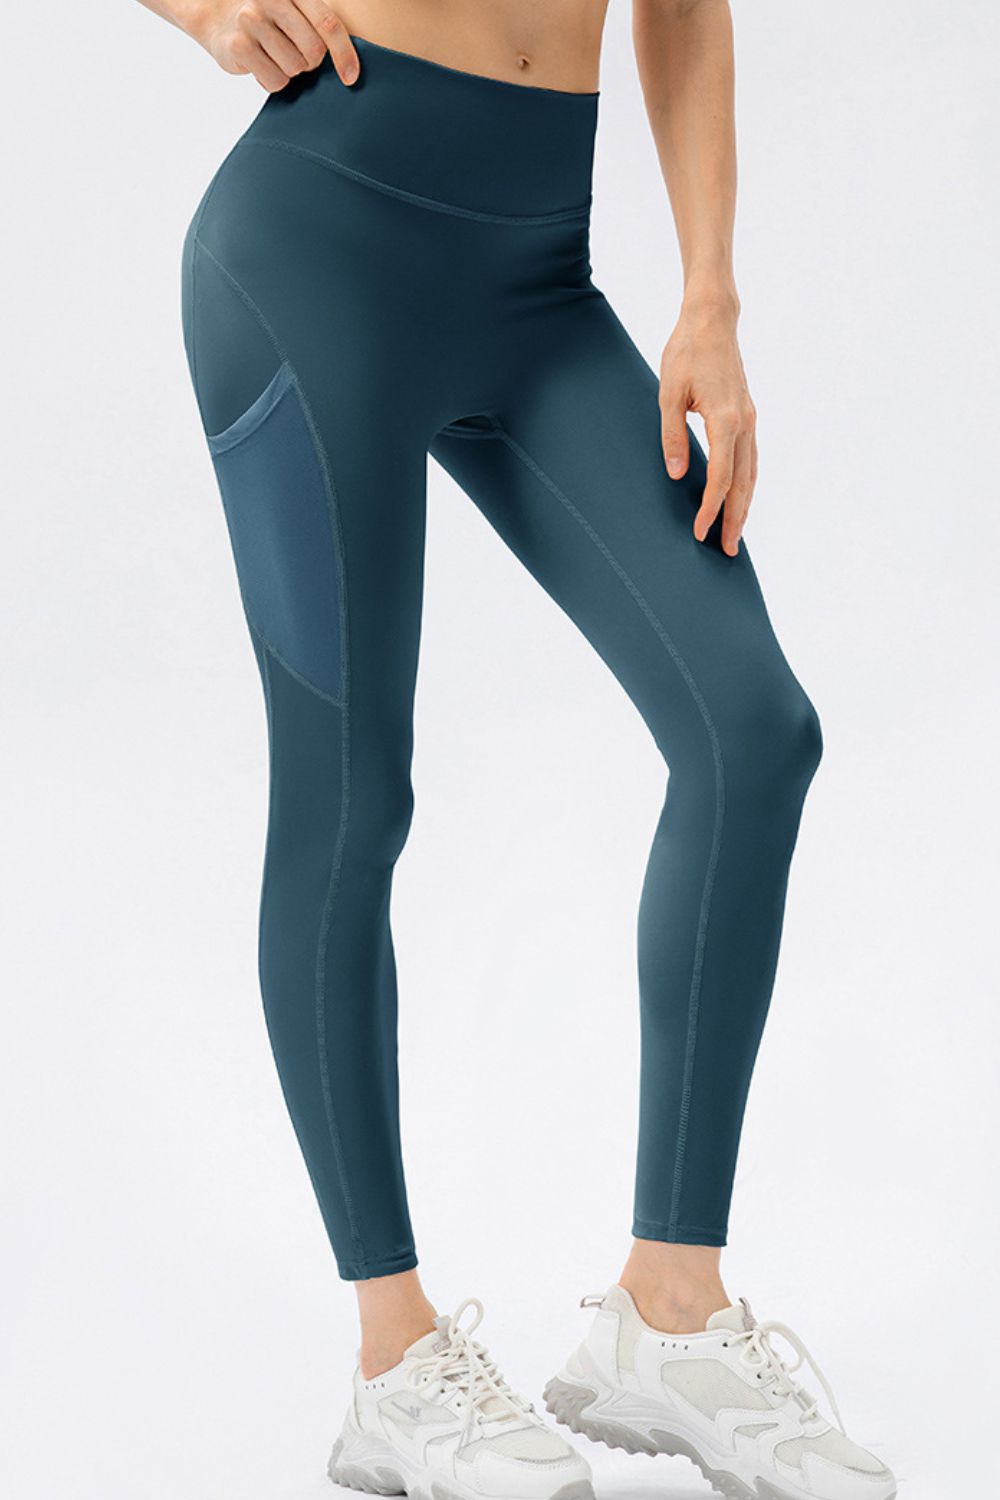 High Waist Slim Fit Long Sports Pants Print on any thing USA/STOD clothes